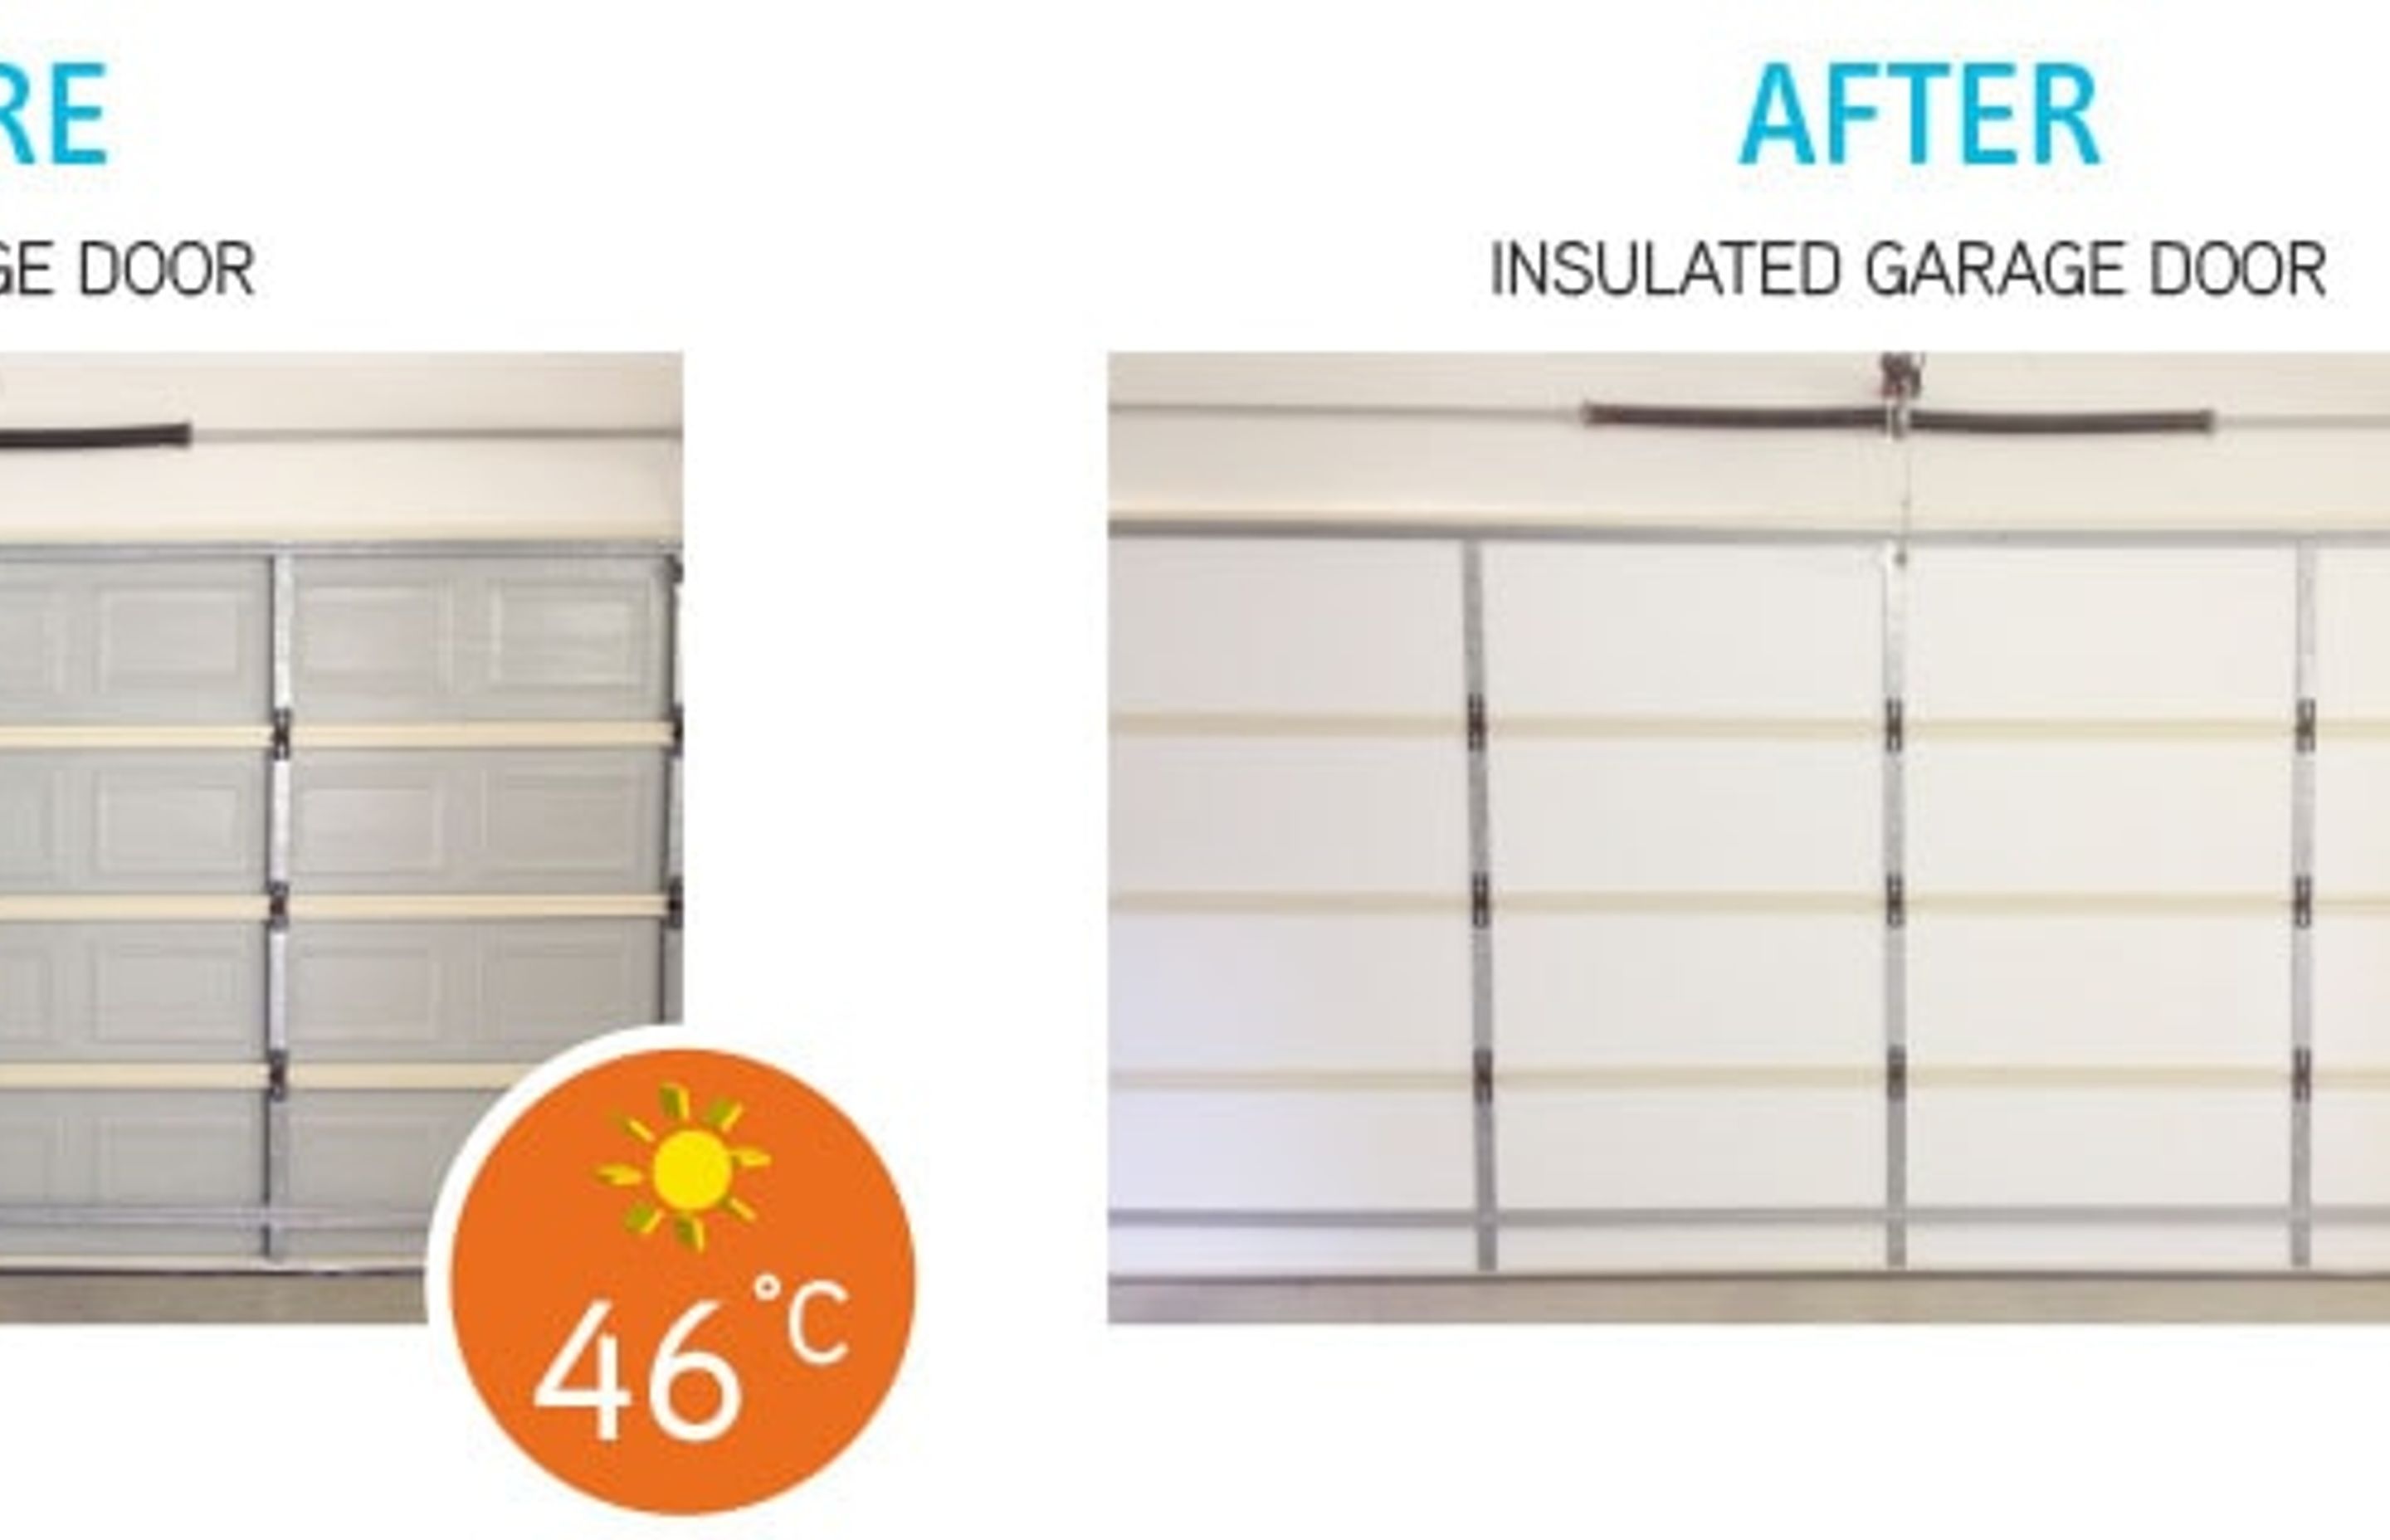 Increase your Home's Energy Efficiency with Insulated Garage Doors